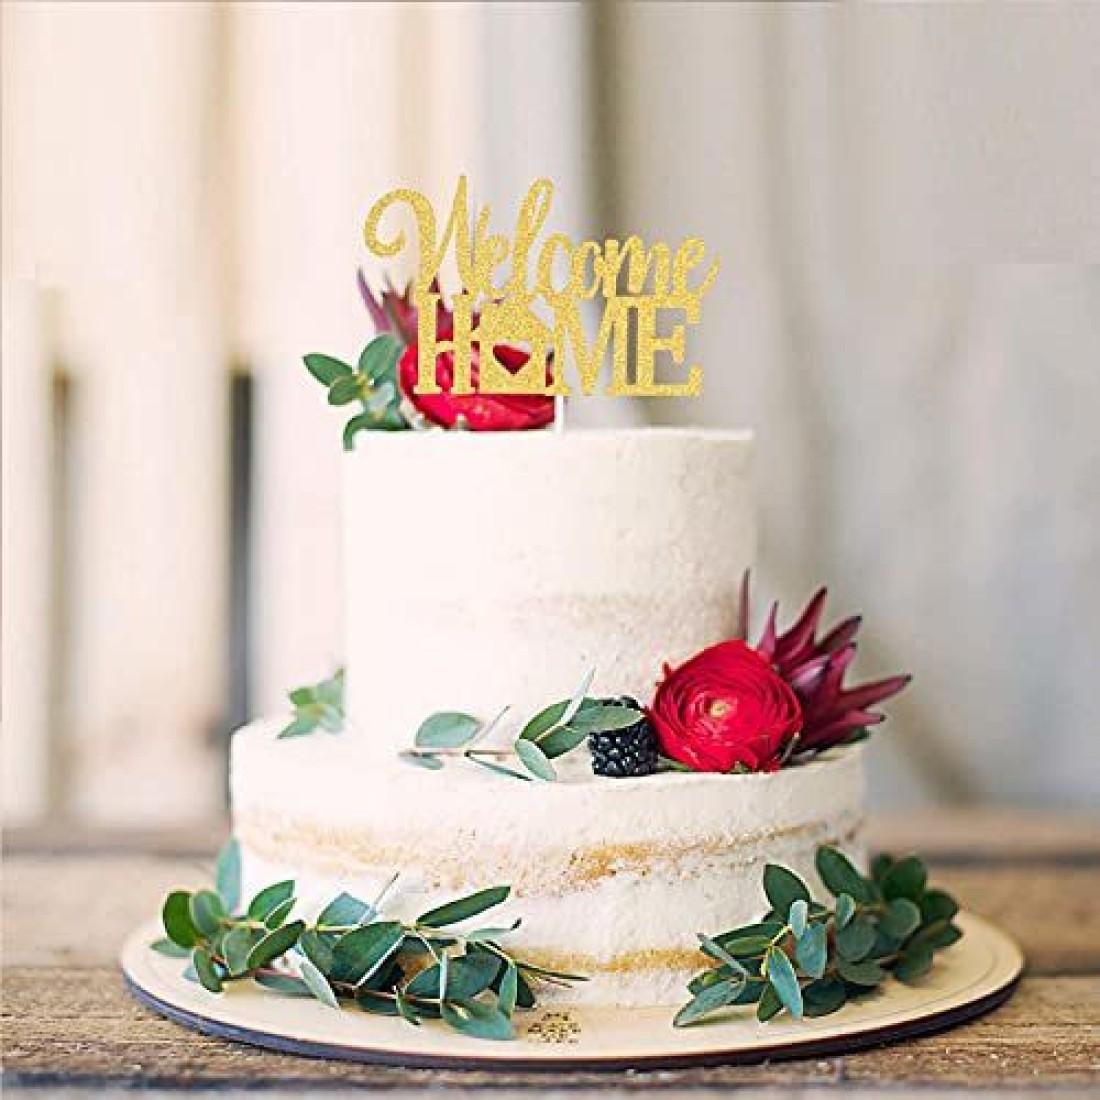 Home Sweet Home Cake Topper, New Home, Welcome Home Sign Cake Decor, House  Warming Party Decorations Supplies, Gold Glitter : Buy Online at Best Price  in KSA - Souq is now Amazon.sa: